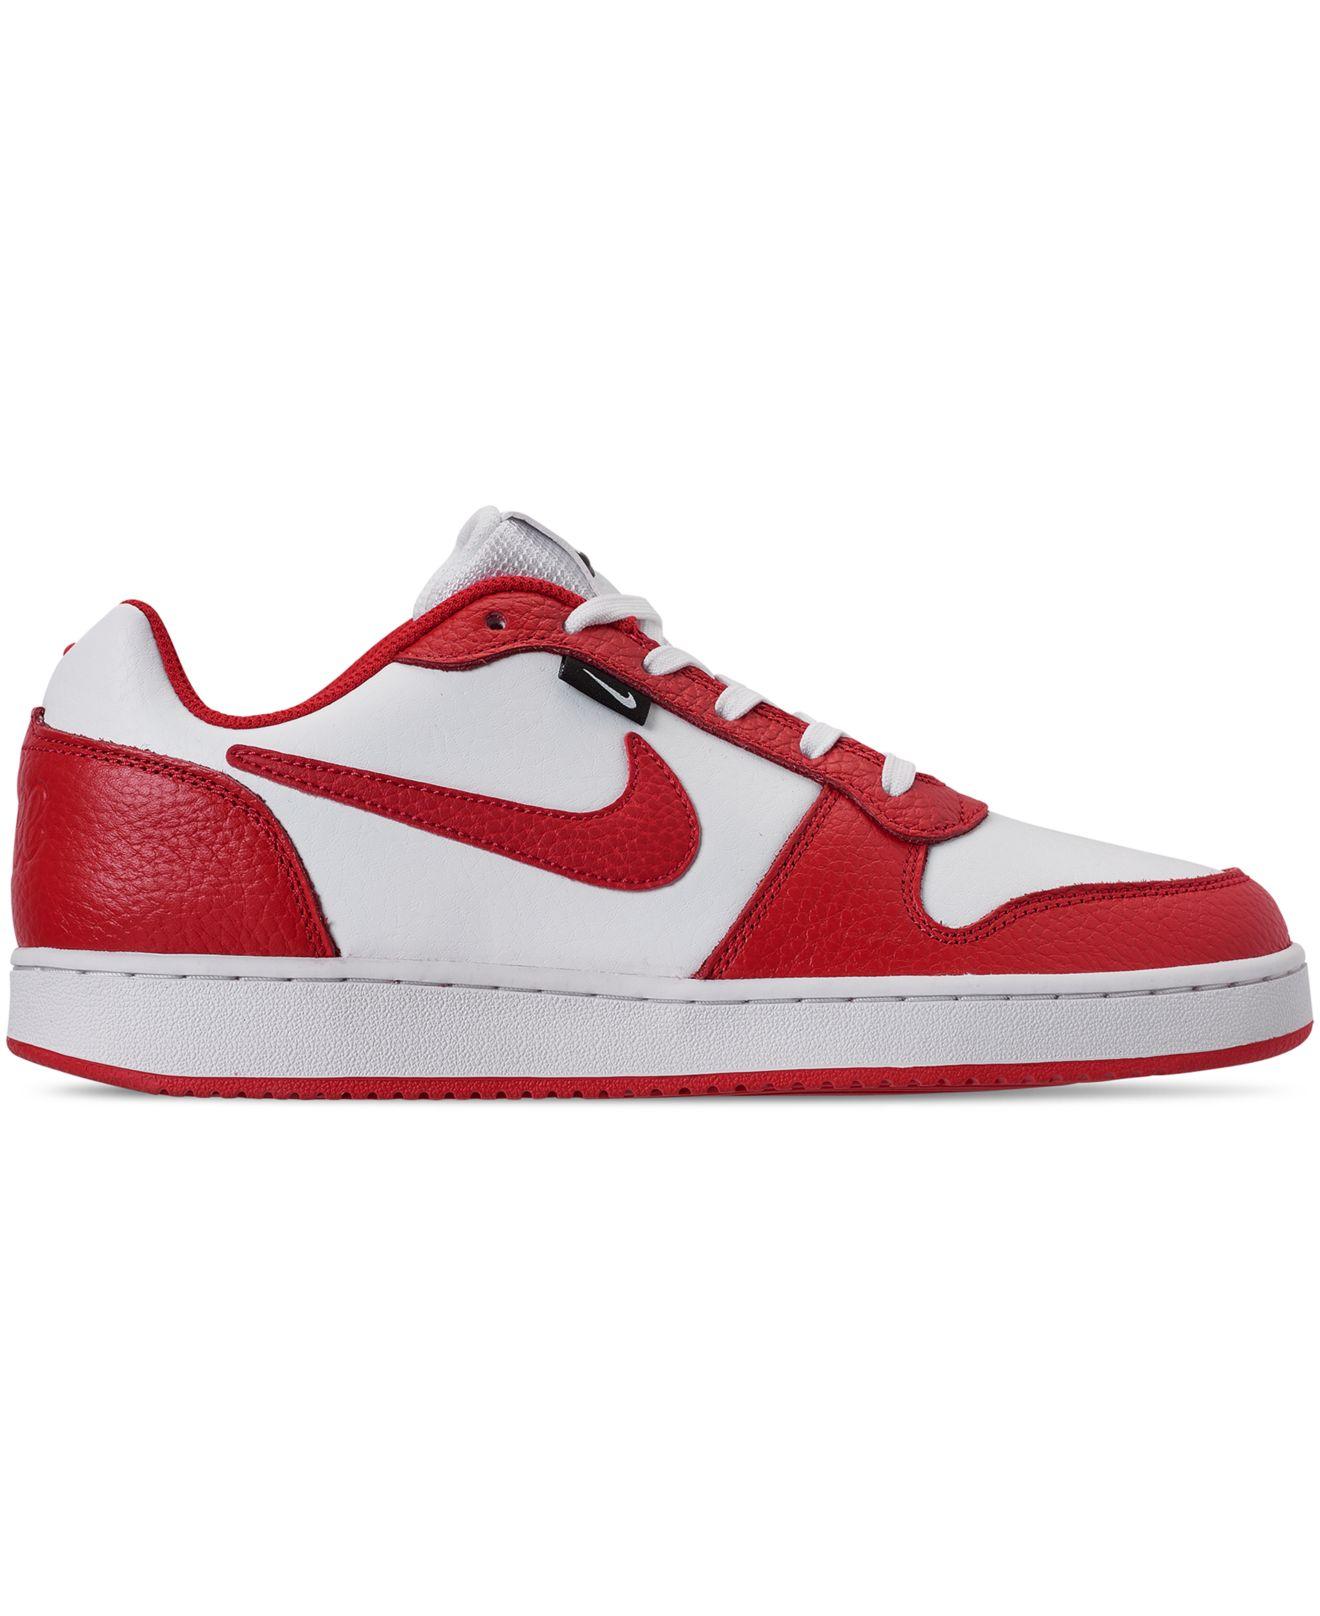 Nike Leather Ebernon Low Premium Casual Sneakers From Finish Line in ...